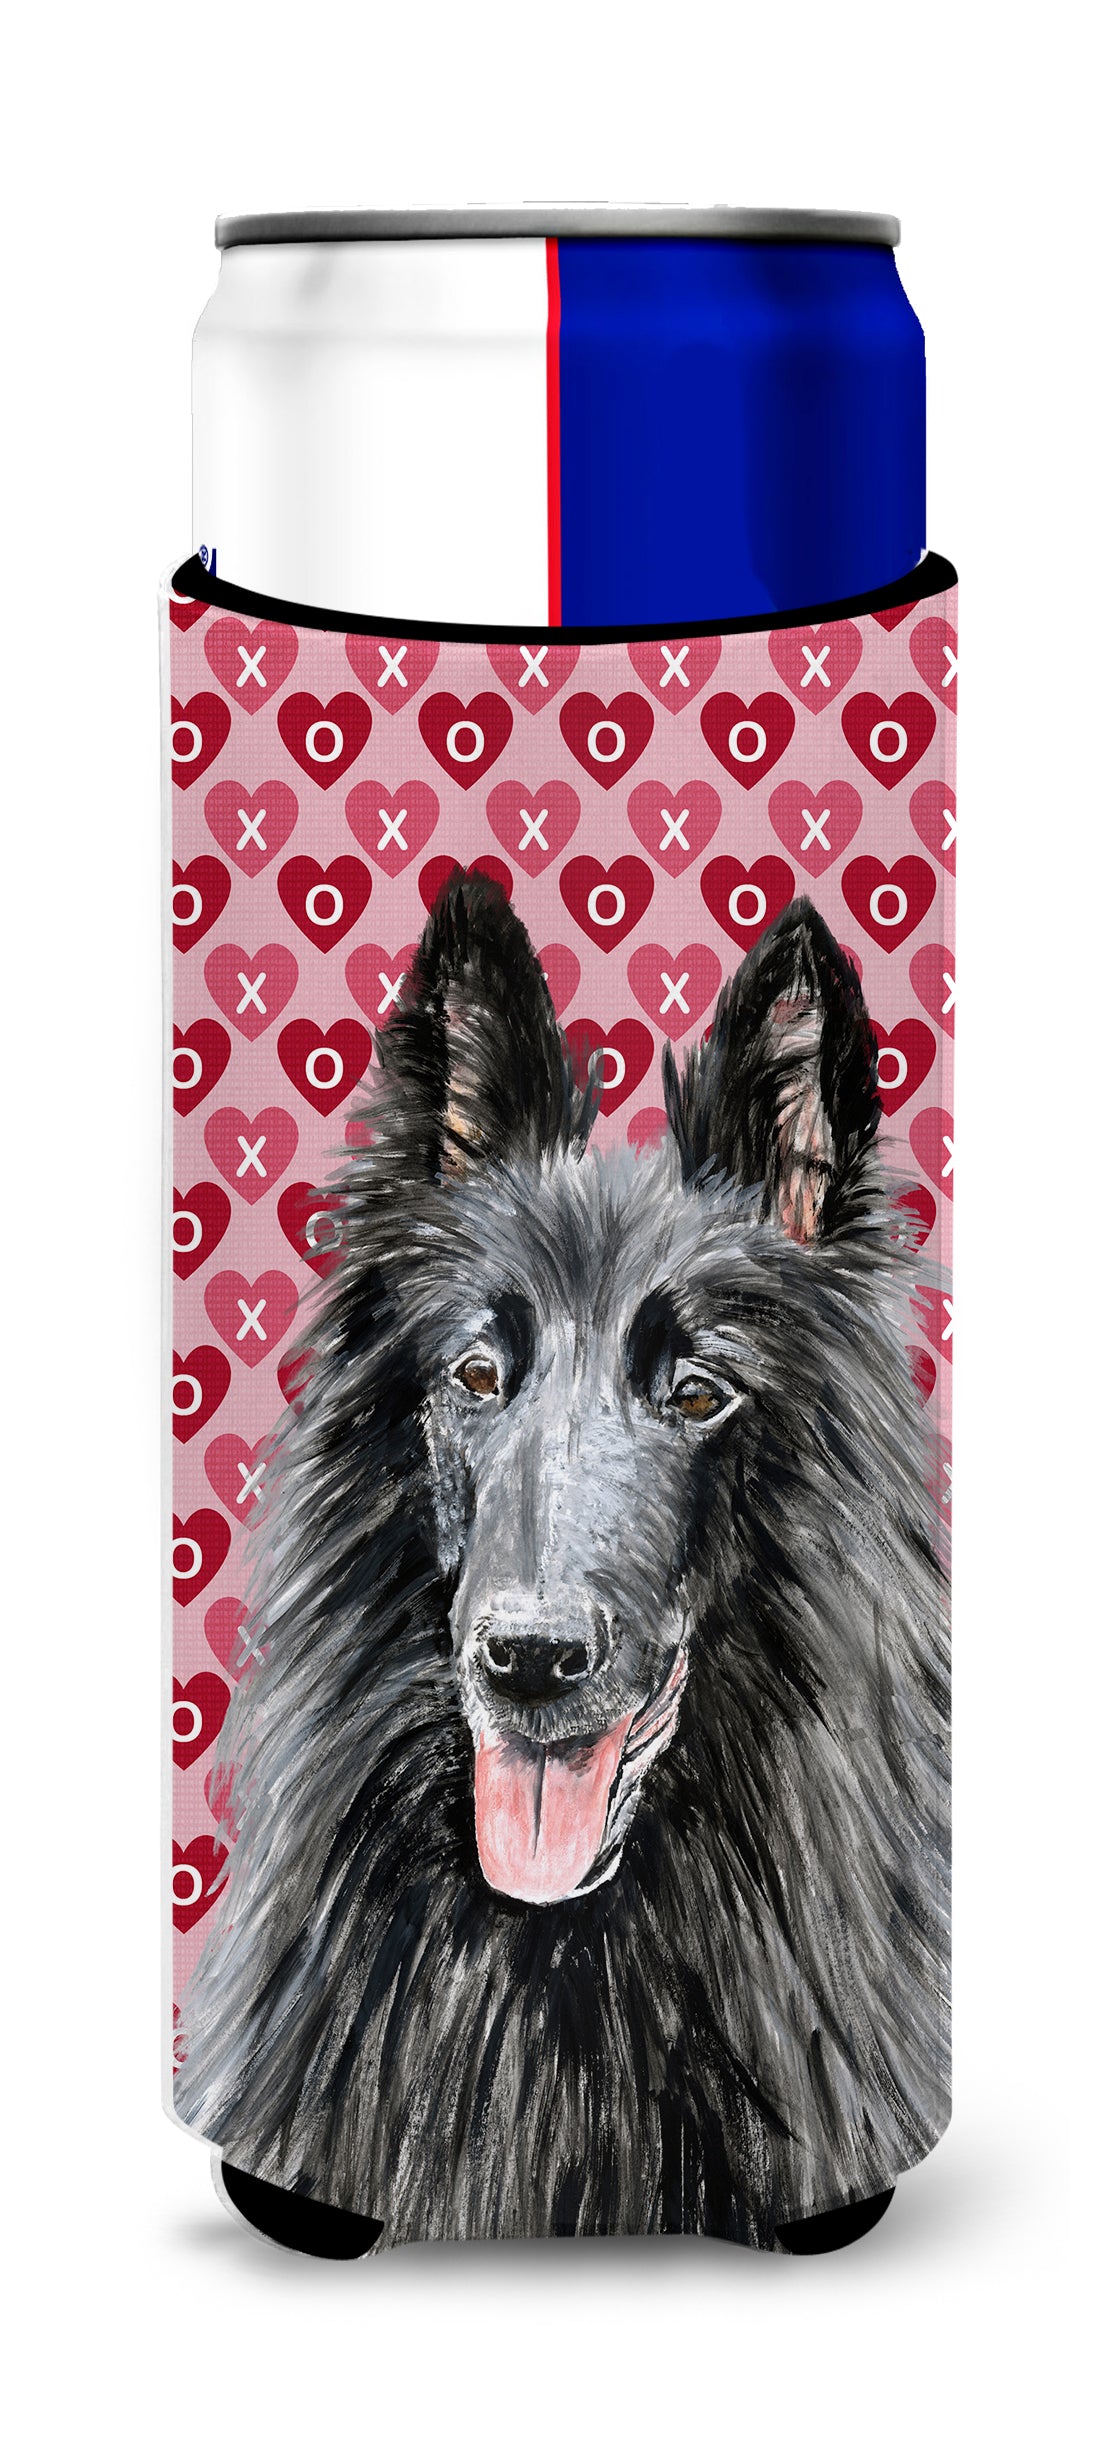 Belgian Sheepdog Hearts Love and Valentine&#39;s Day Portrait Ultra Beverage Insulators for slim cans SC9241MUK.